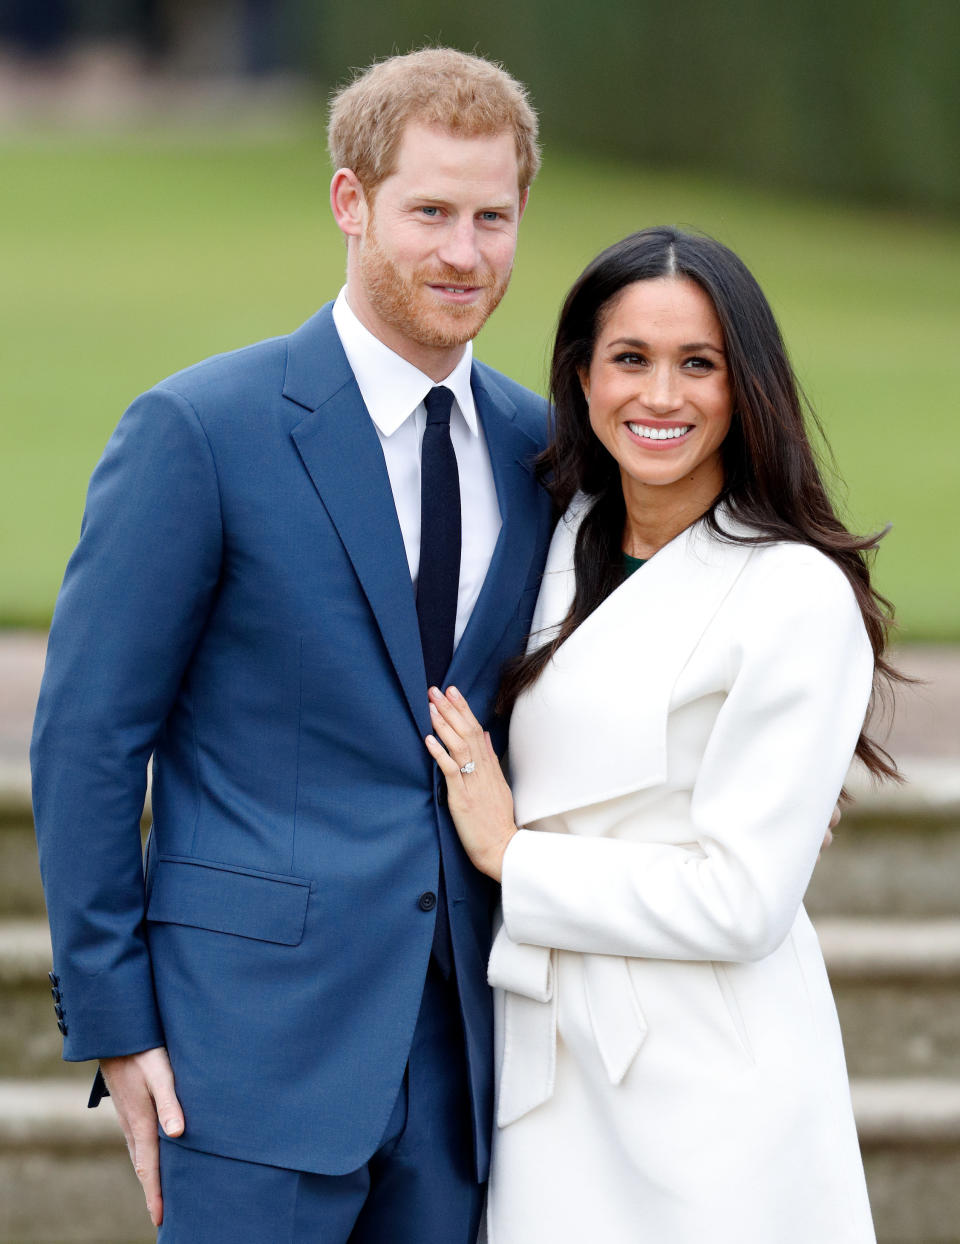 Prince Harry and Meghan Markle attend an official photocall to announce their engagement at The Sunken Gardens, Kensington Palace on Nov. 27, 2017 in London, England.&nbsp;